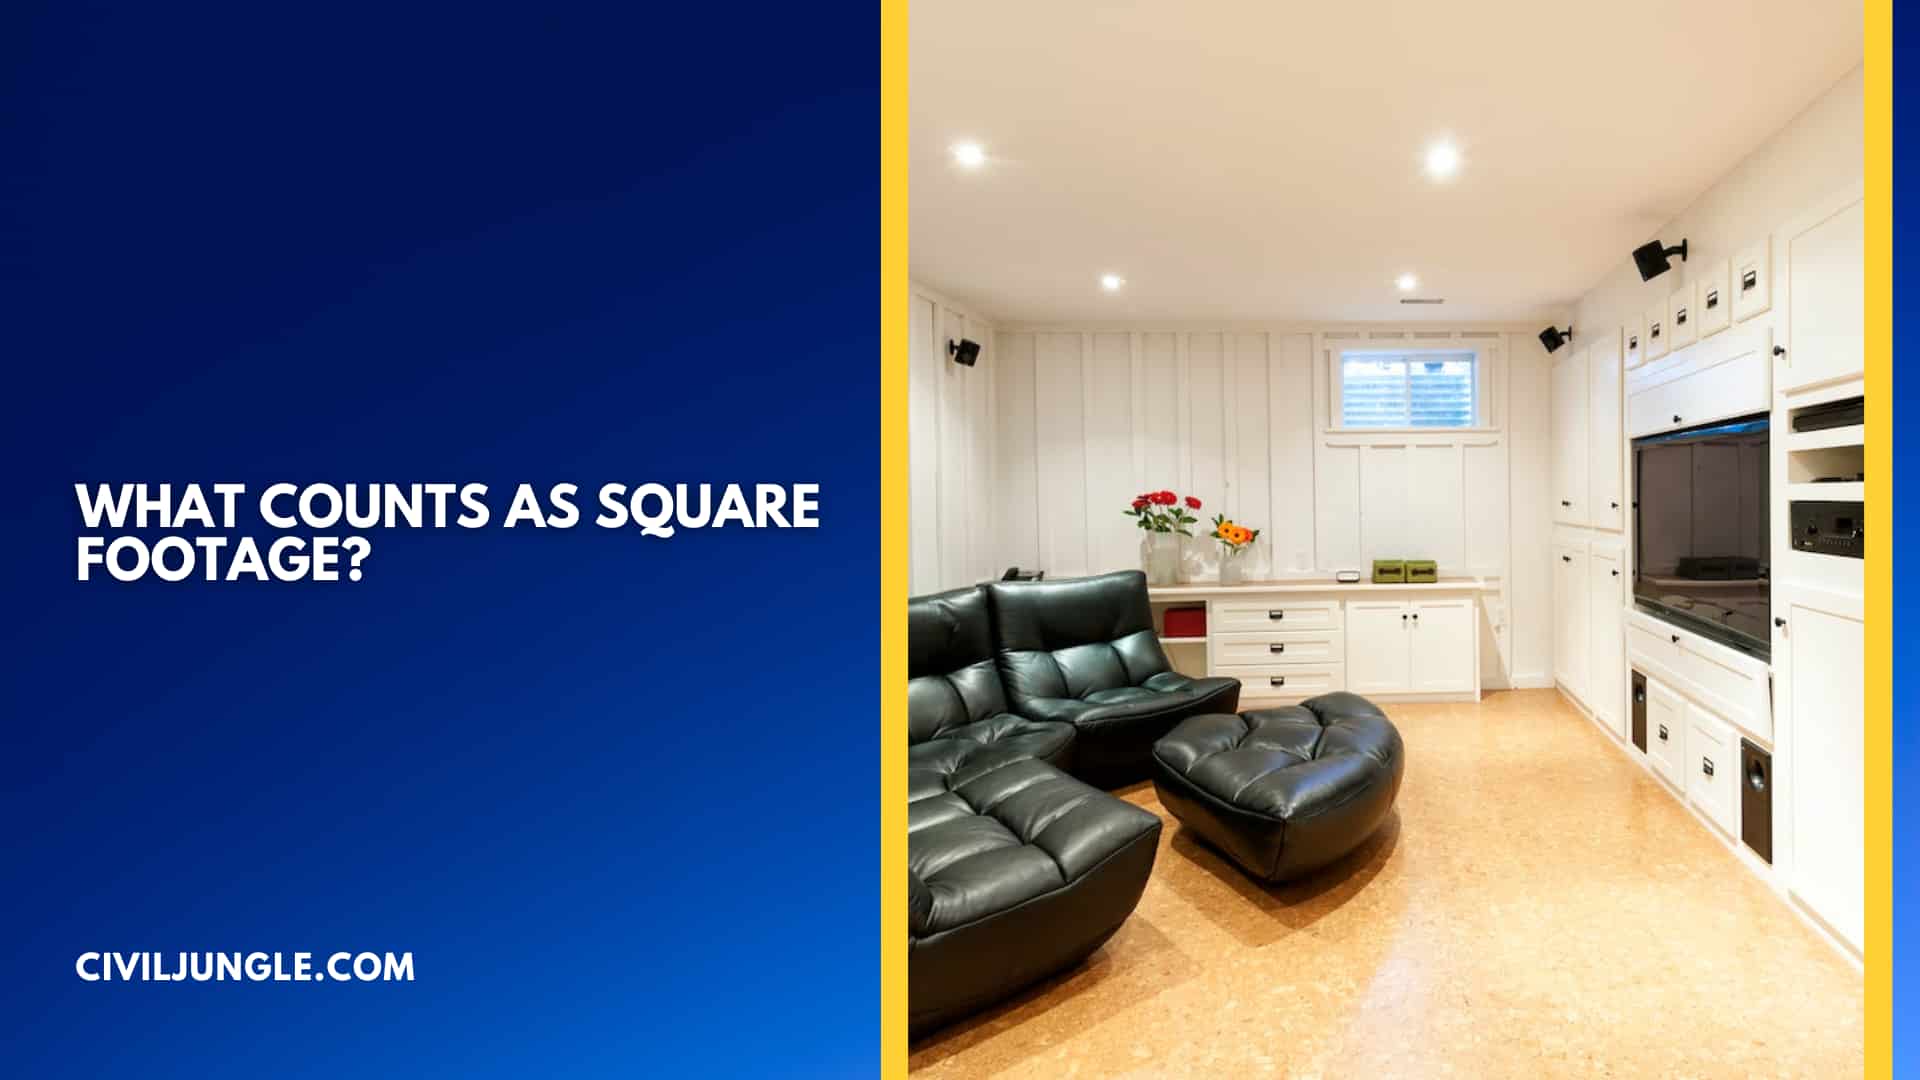 What Counts as Square Footage?